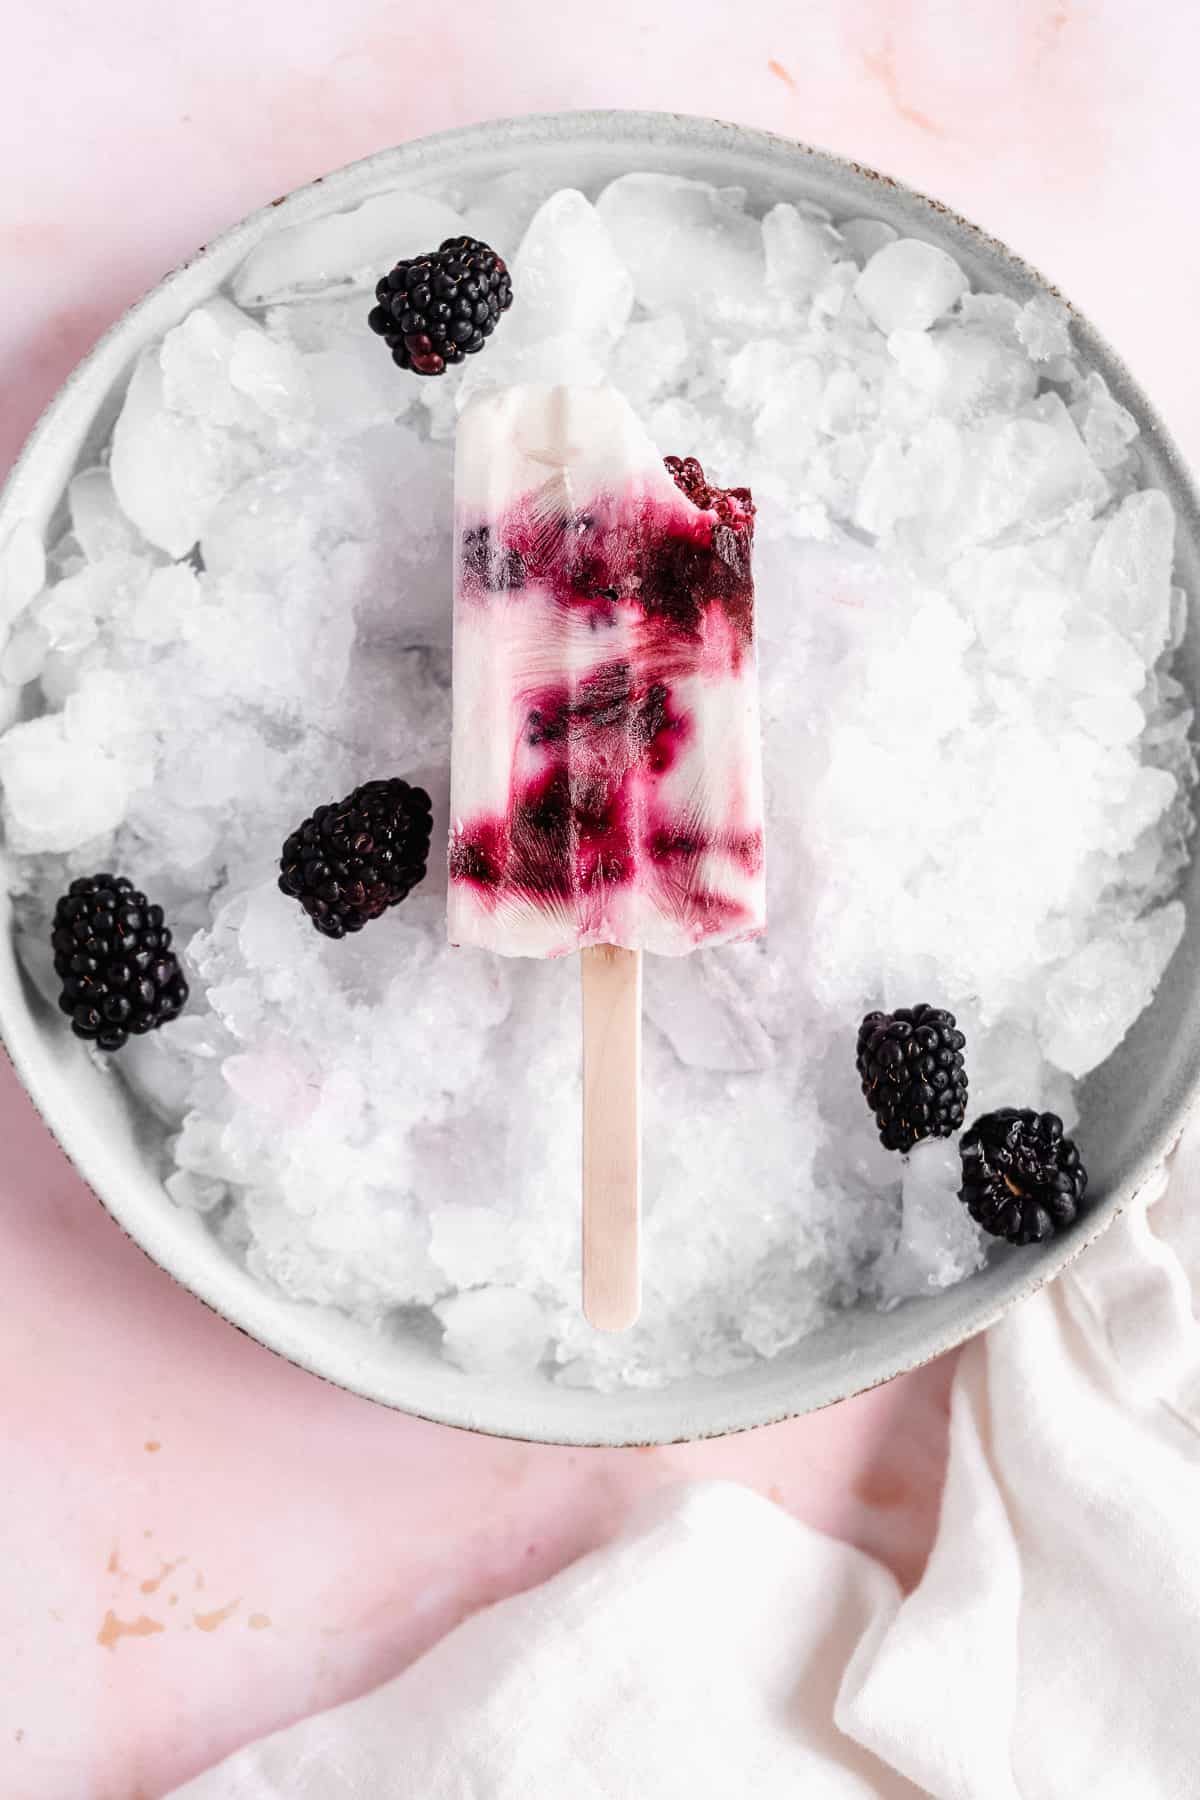 Overhead photo of a single popsicle sitting on top of ice on a plate.  A bite has been taken out of the popsicle.  Blackberries are sprinkled around.  